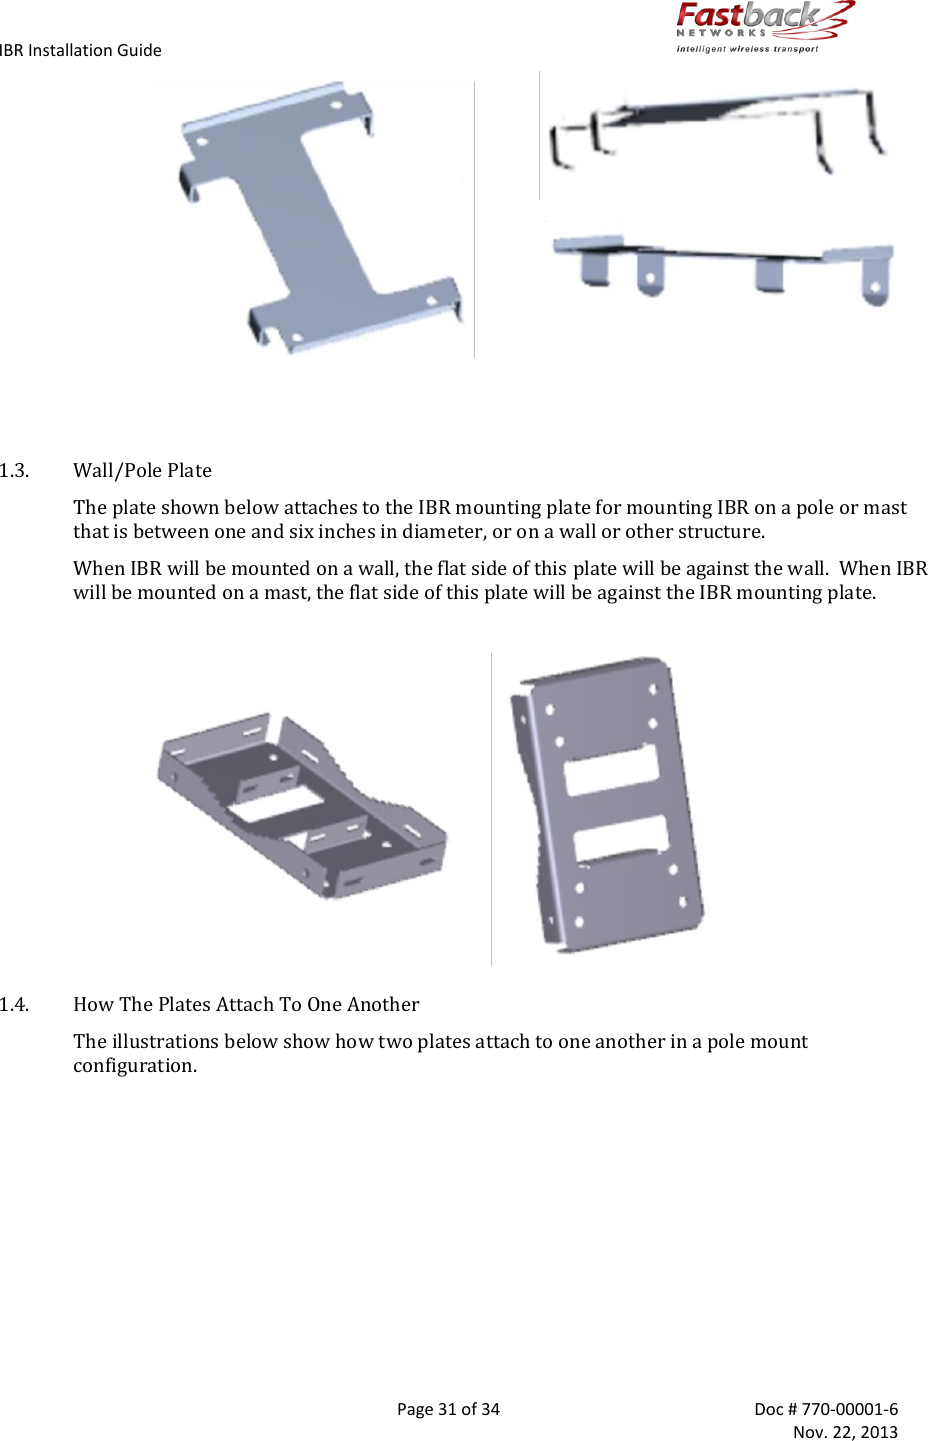 IBR Installation Guide        Page 31 of 34  Doc # 770-00001-6     Nov. 22, 2013                                              1.3. Wall/Pole Plate The plate shown below attaches to the IBR mounting plate for mounting IBR on a pole or mast that is between one and six inches in diameter, or on a wall or other structure.  When IBR will be mounted on a wall, the flat side of this plate will be against the wall.  When IBR will be mounted on a mast, the flat side of this plate will be against the IBR mounting plate.   1.4. How The Plates Attach To One Another The illustrations below show how two plates attach to one another in a pole mount configuration.  